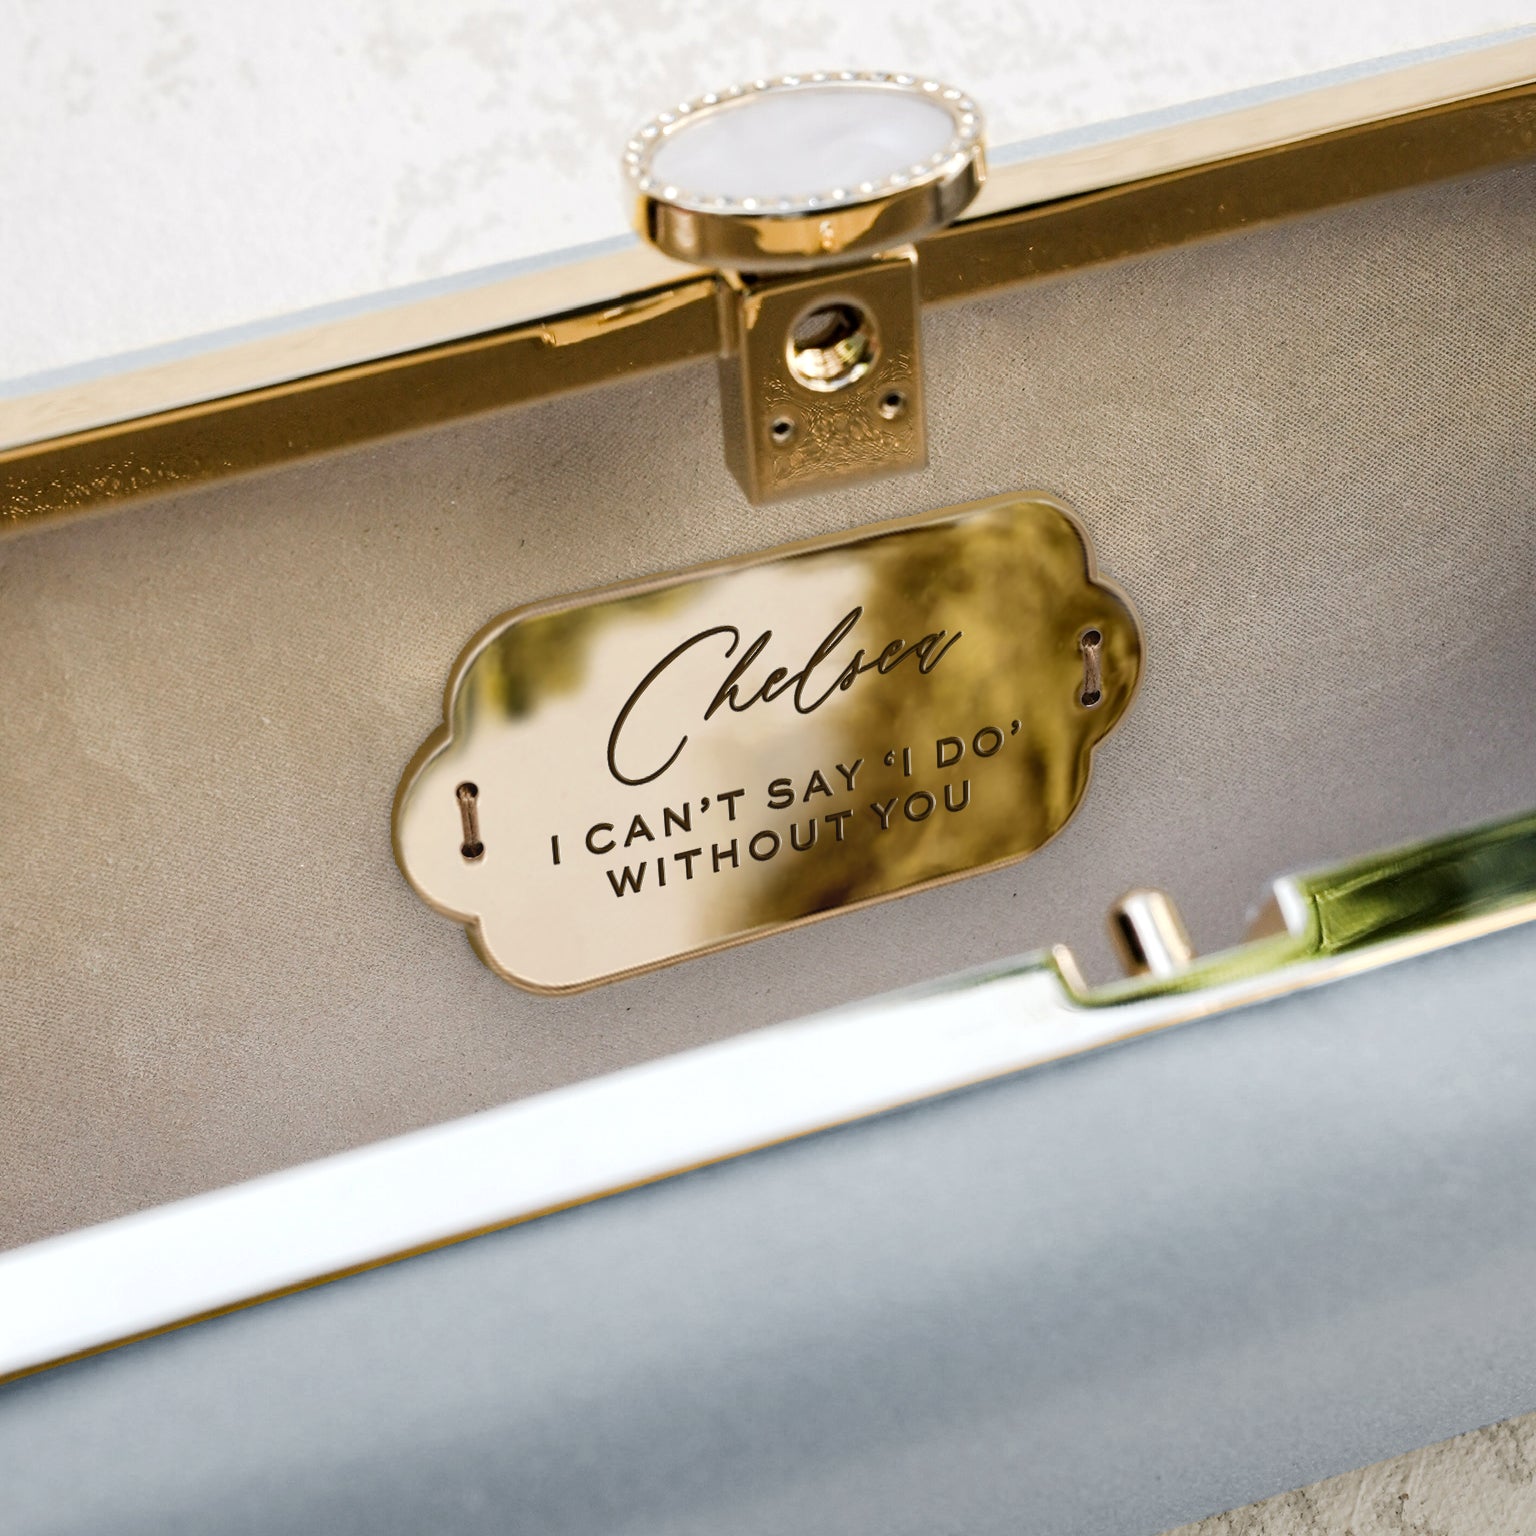 I can&#39;t do this bridesmaid proposal without your help, The Bella Rosa Collection Bridesmaid Proposal Box with Engraved Bella &#39;Be My Bridesmaid&#39; Clutch Bag Gift.